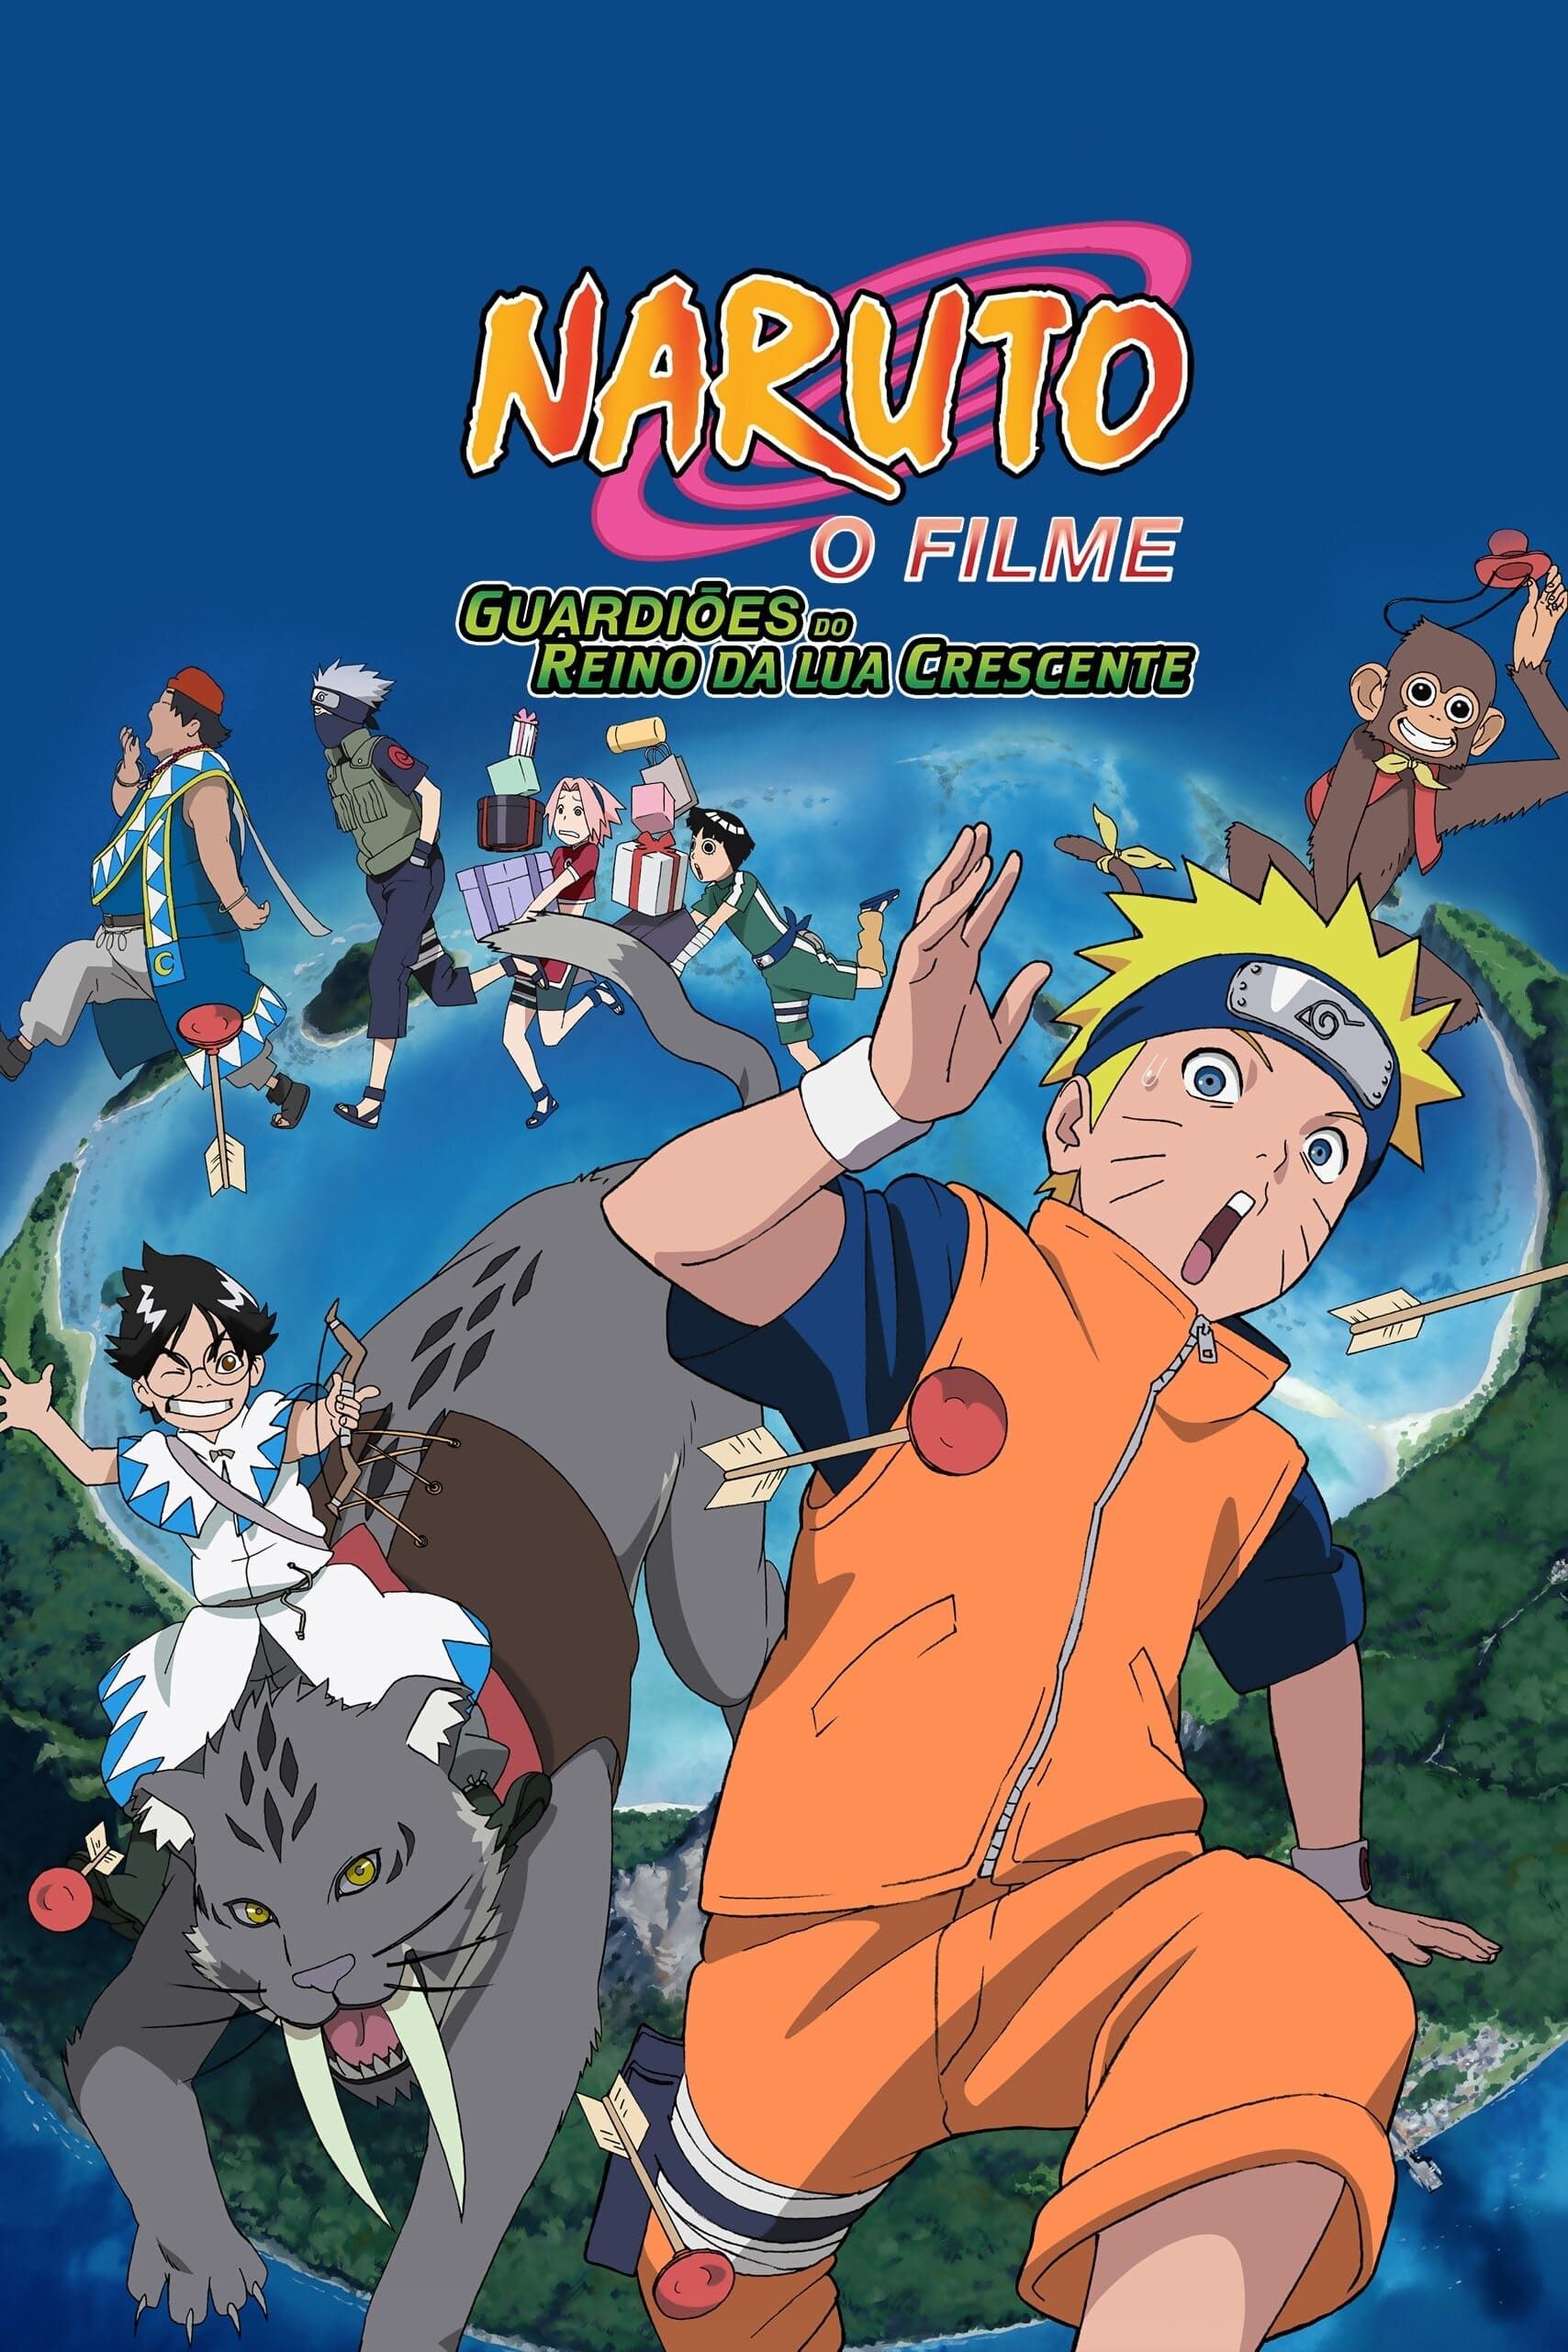 Naruto the Movie 3: Guardians of the Crescent Moon Kingdom (Dub) (Movie) All Episode